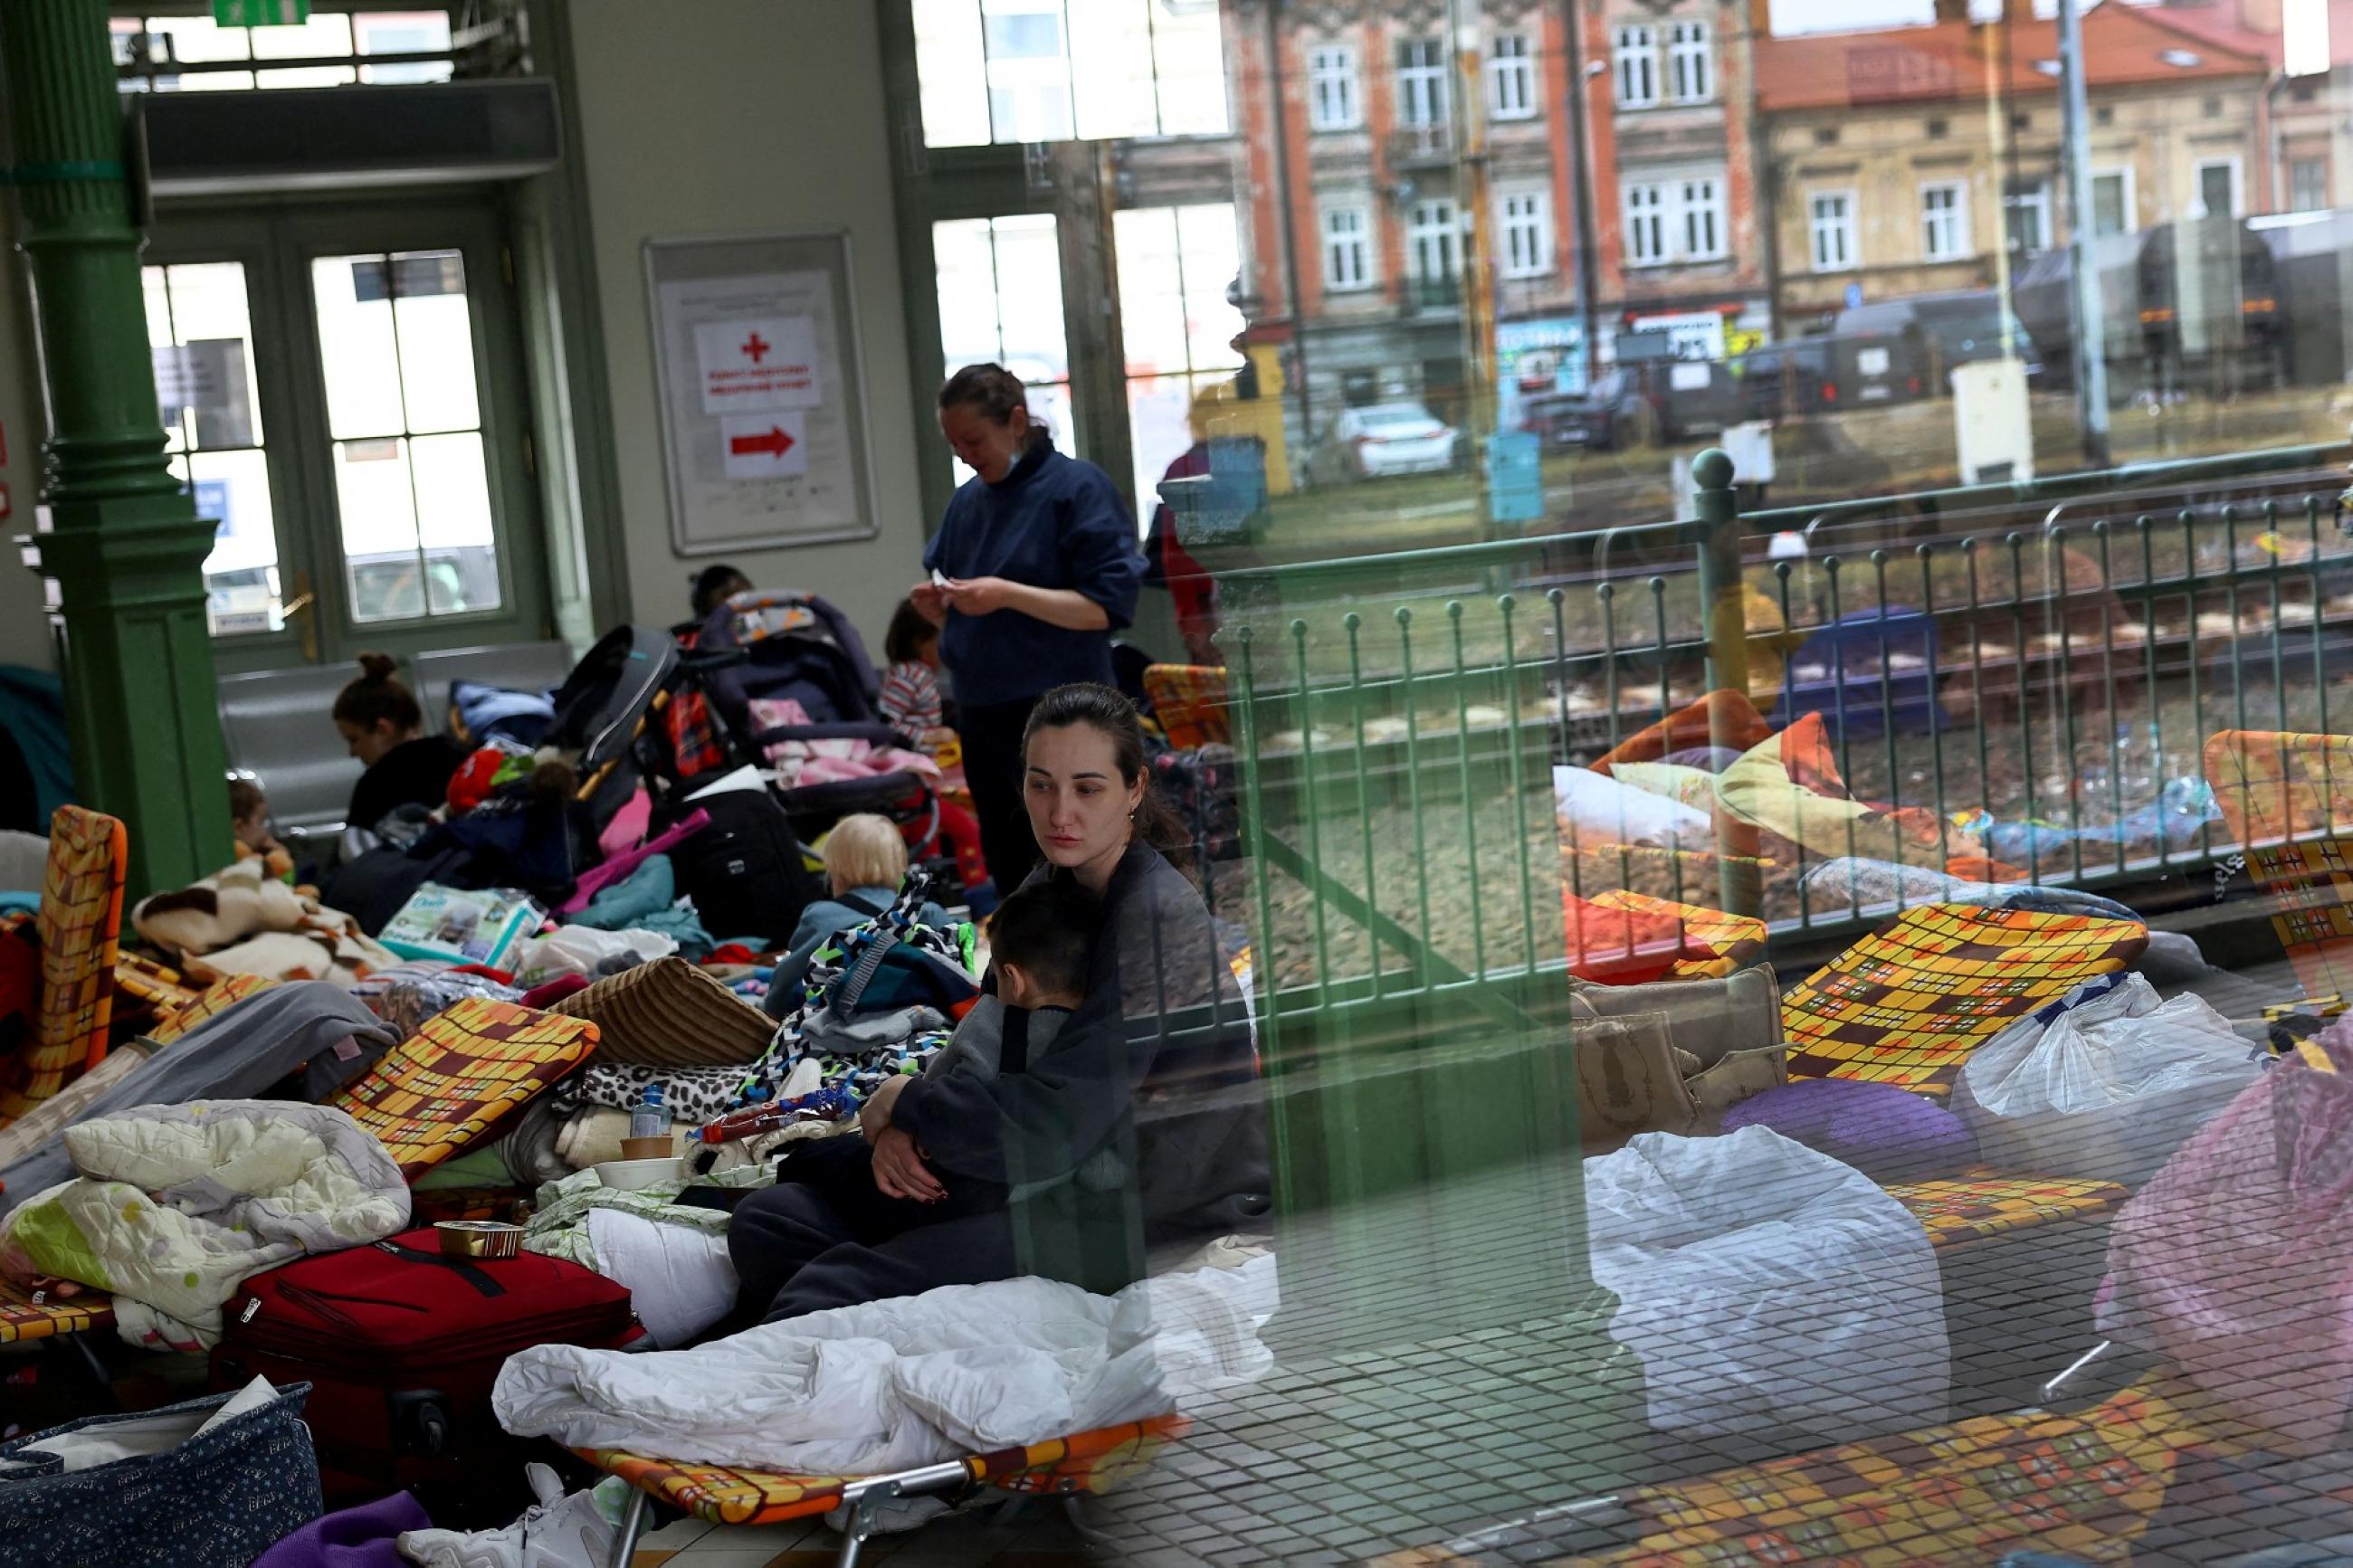 Refugees who fled from the Russian invasion in Ukraine rest inside a temporary camp at the train station in Przemysl, Poland, March 2, 2022.